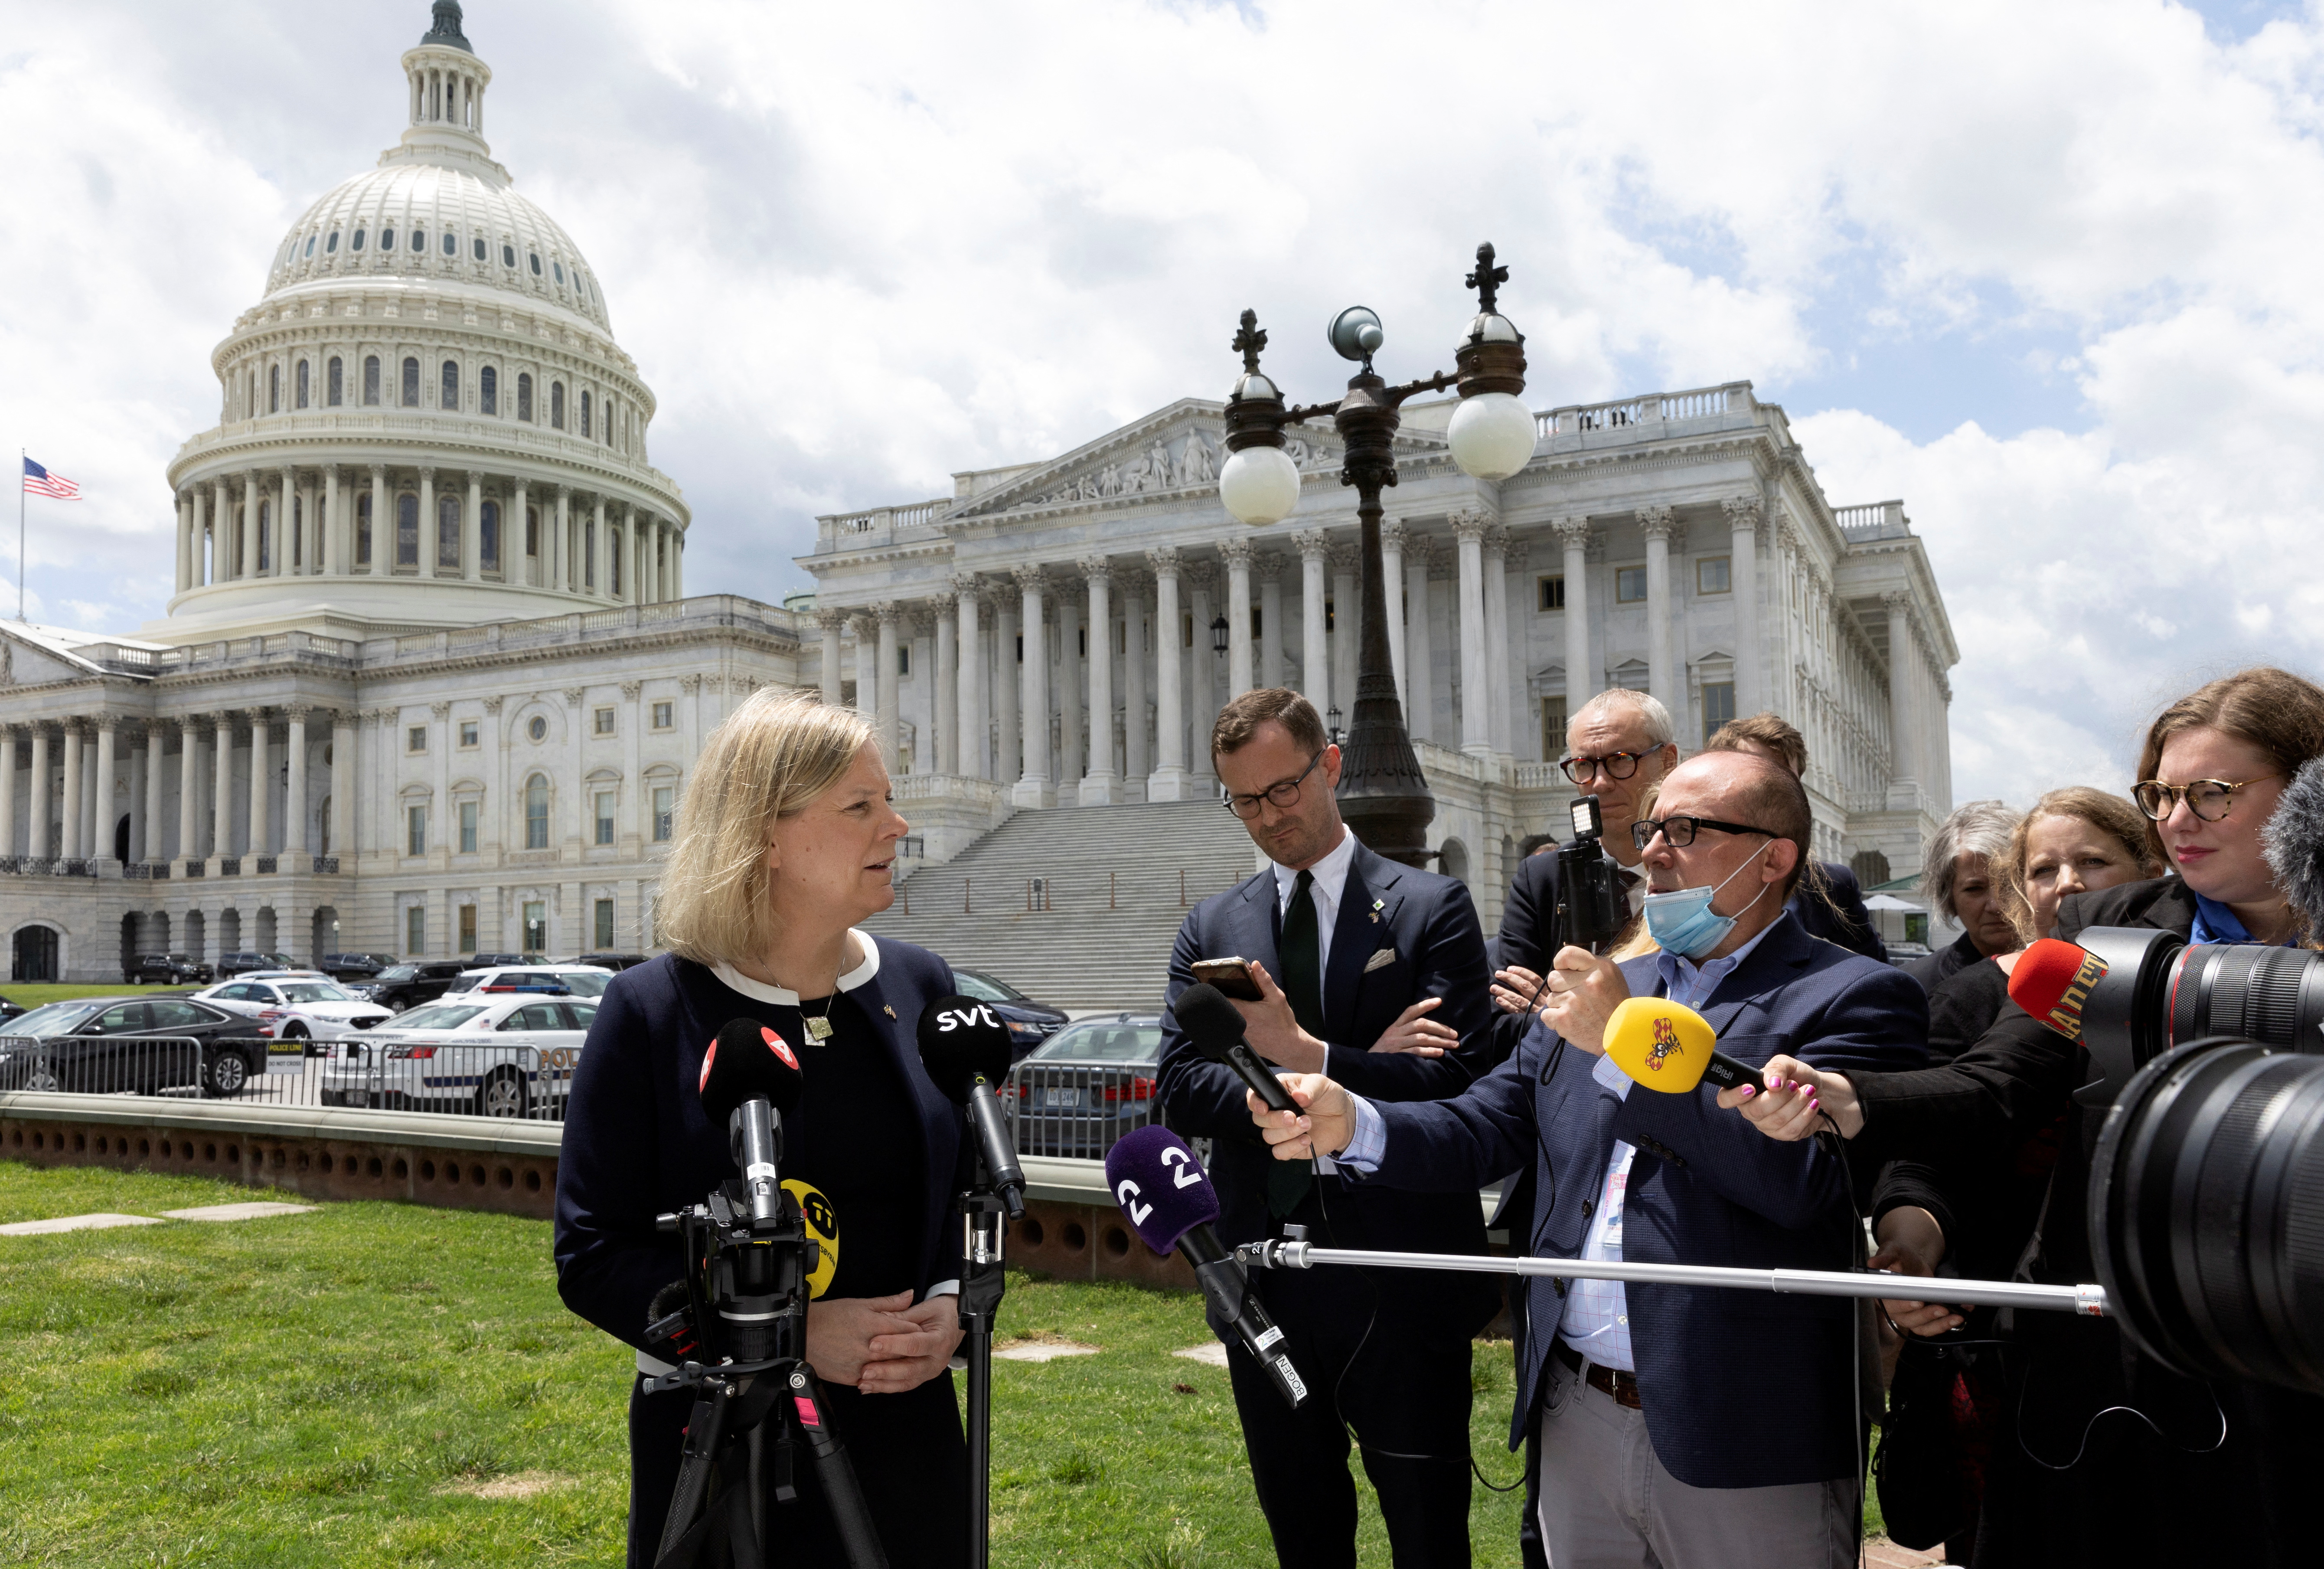 Finland and Sweden visit Congress in the U.S.